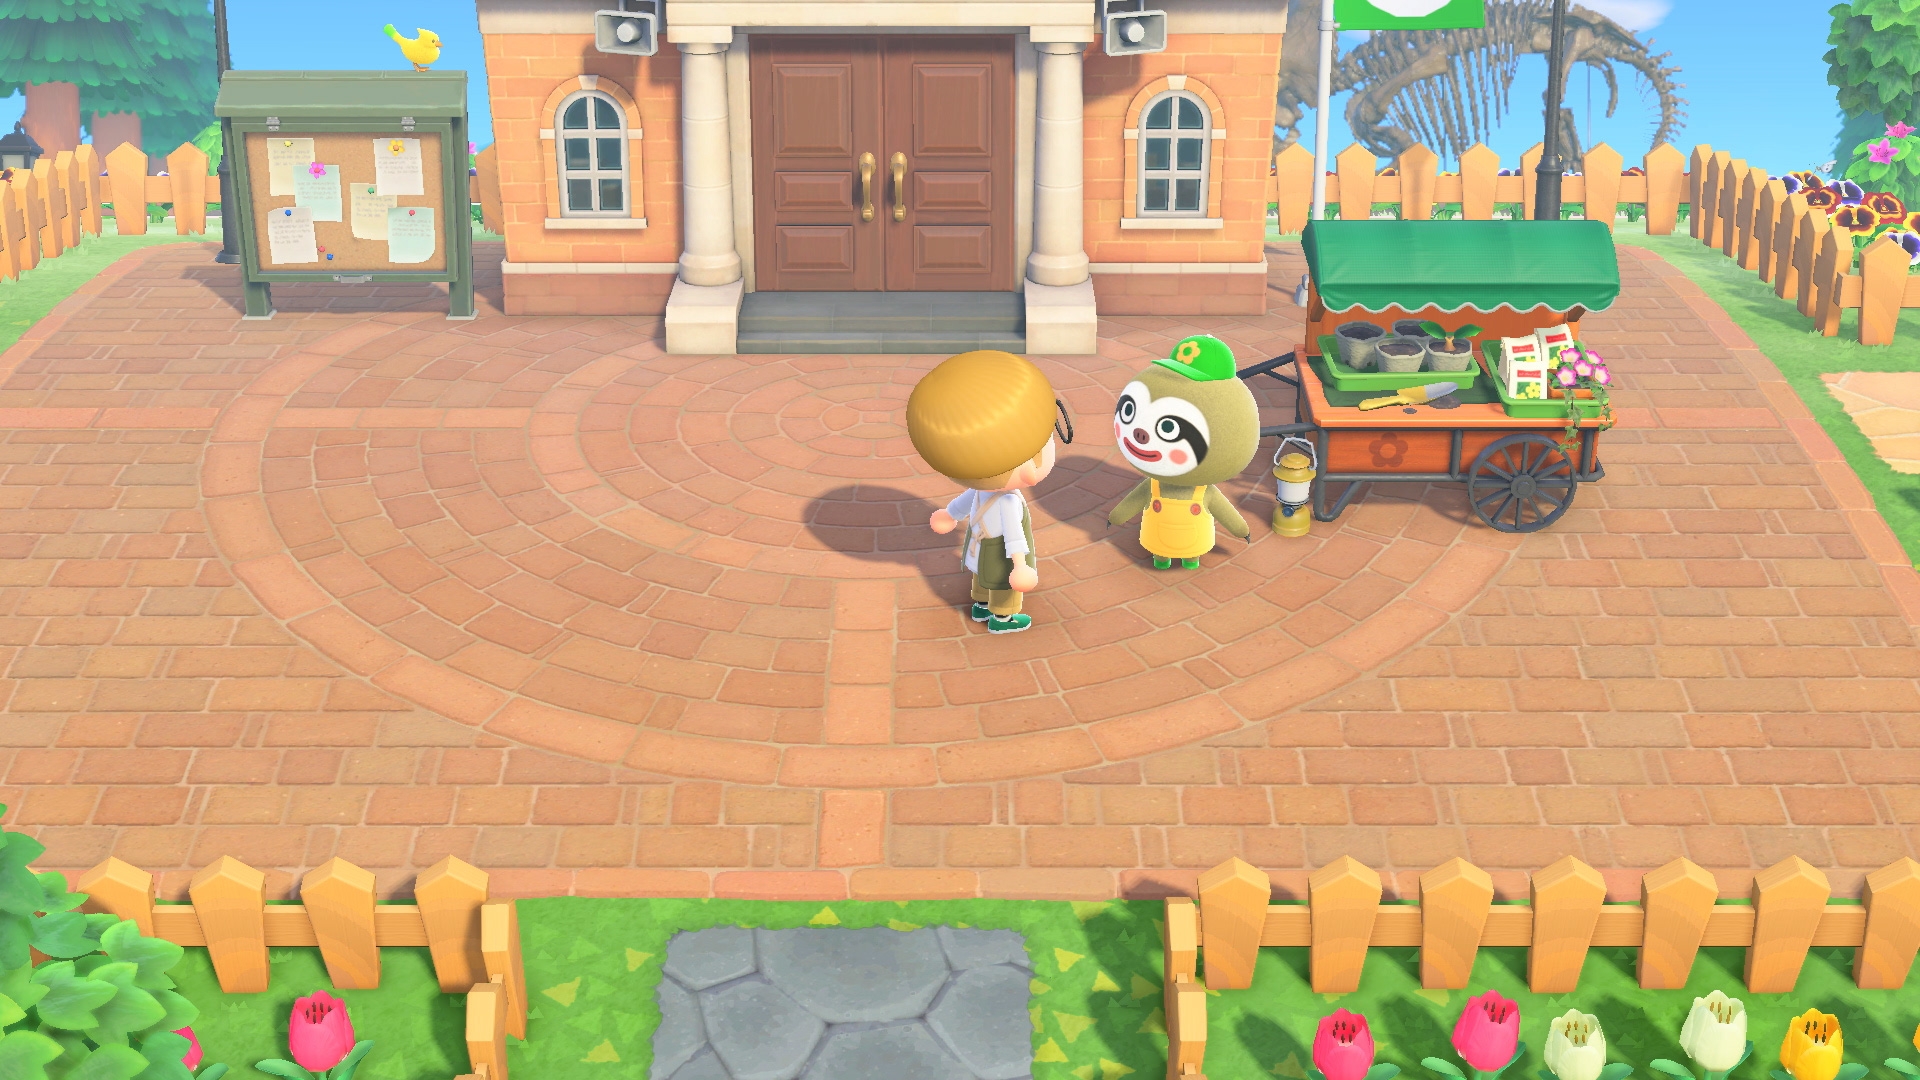 how to get animal crossing new horizons for free on switch